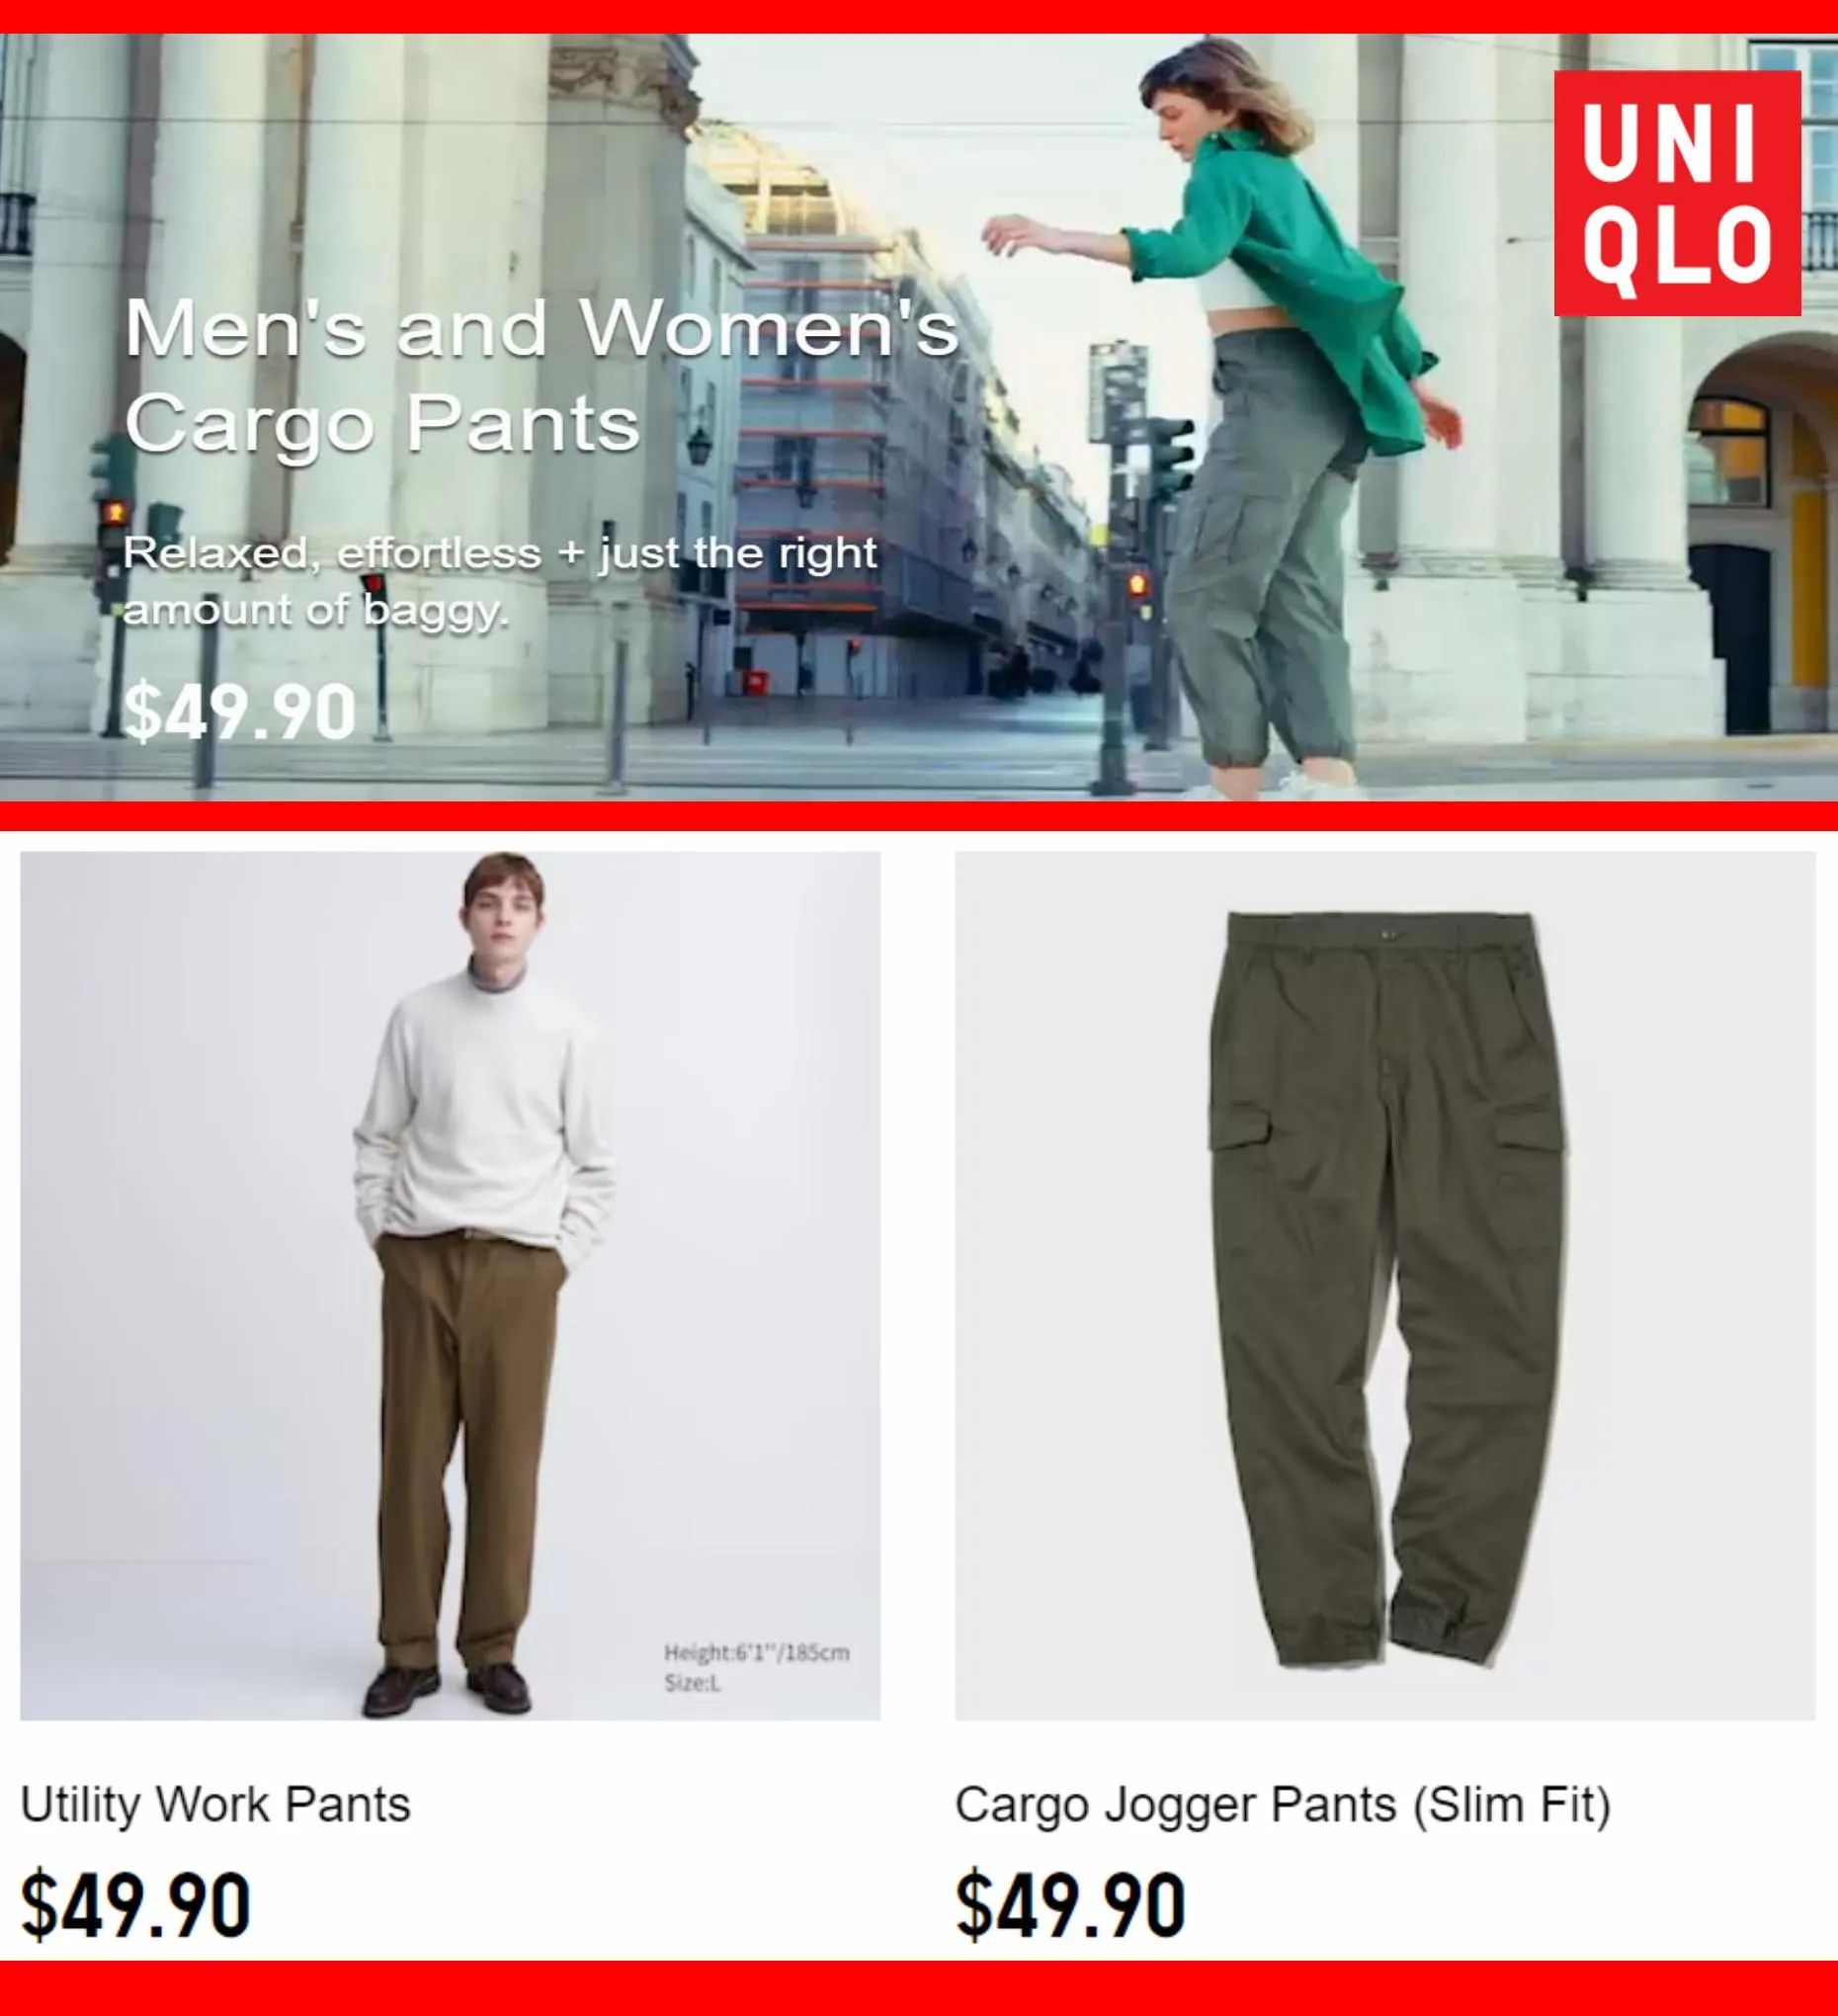 Catalogue Men's and Women's Cargo Pants $49.90, page 00006